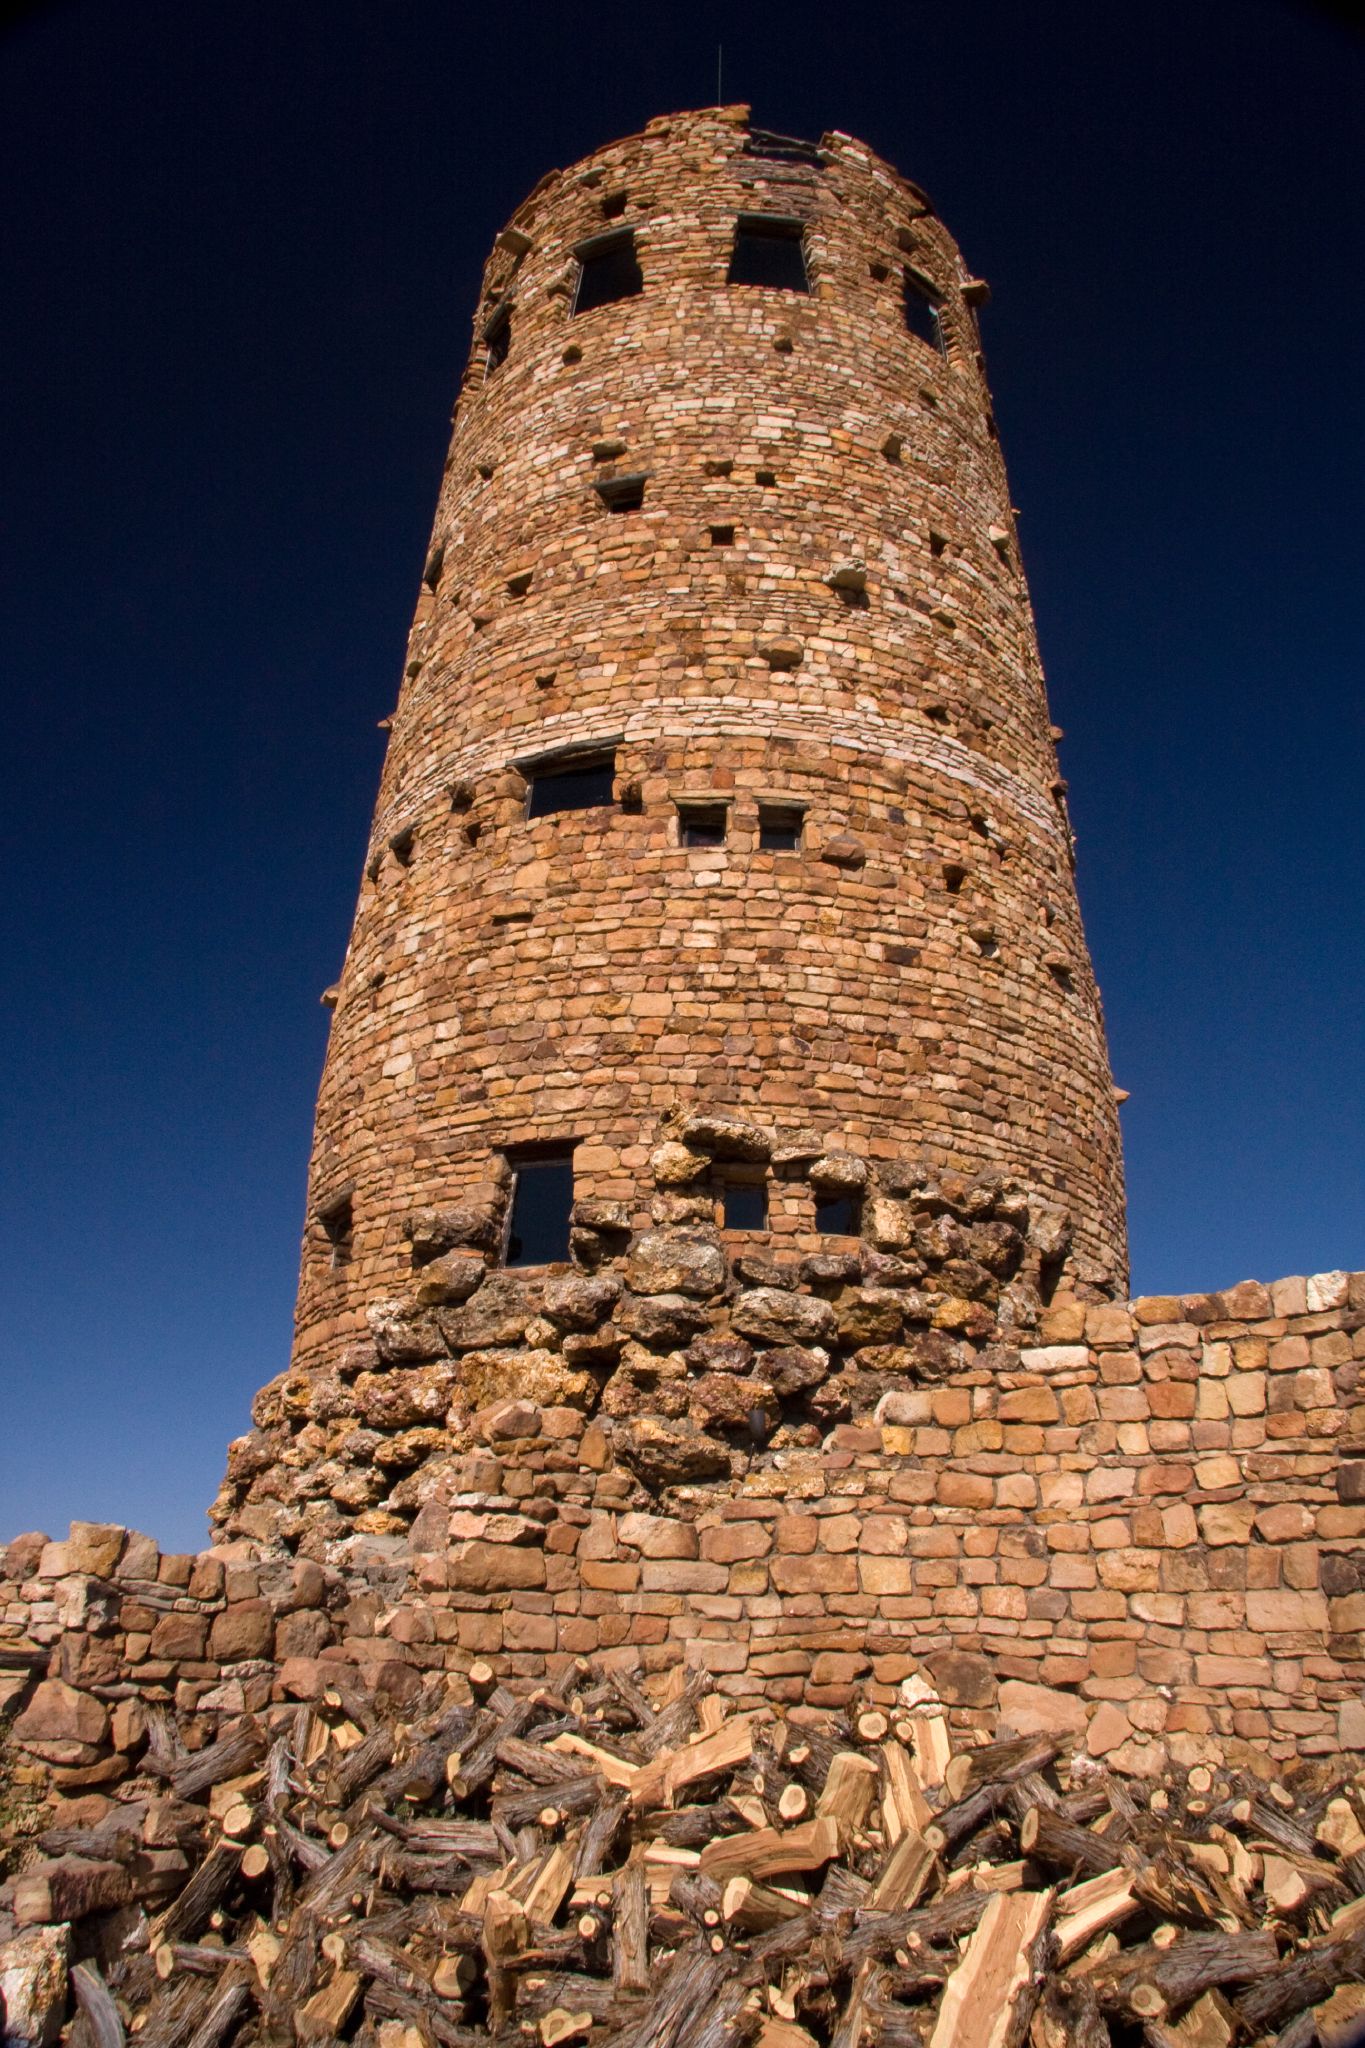 File:The Watchtower 02 (4105767870).jpg - Wikimedia Commons